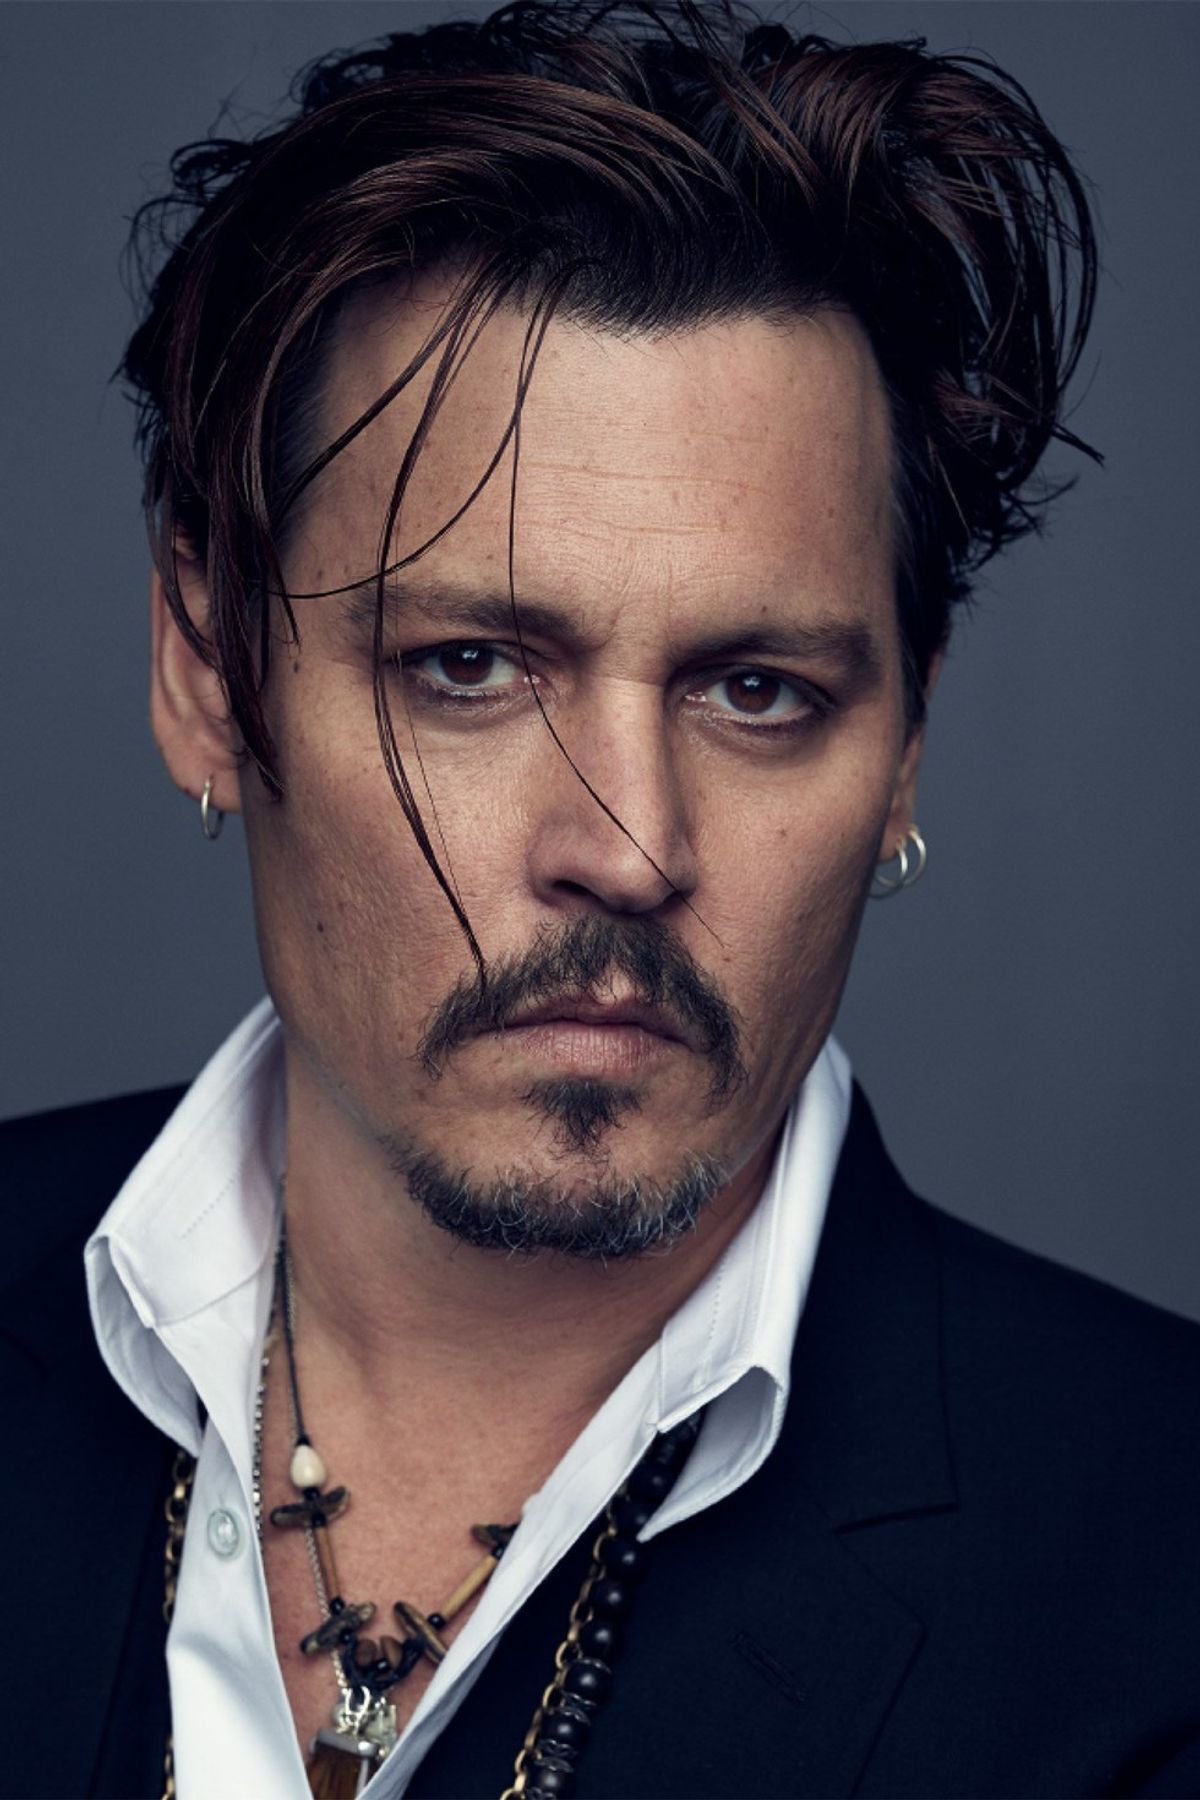 12 Signs You're Obsessed with Johnny Depp